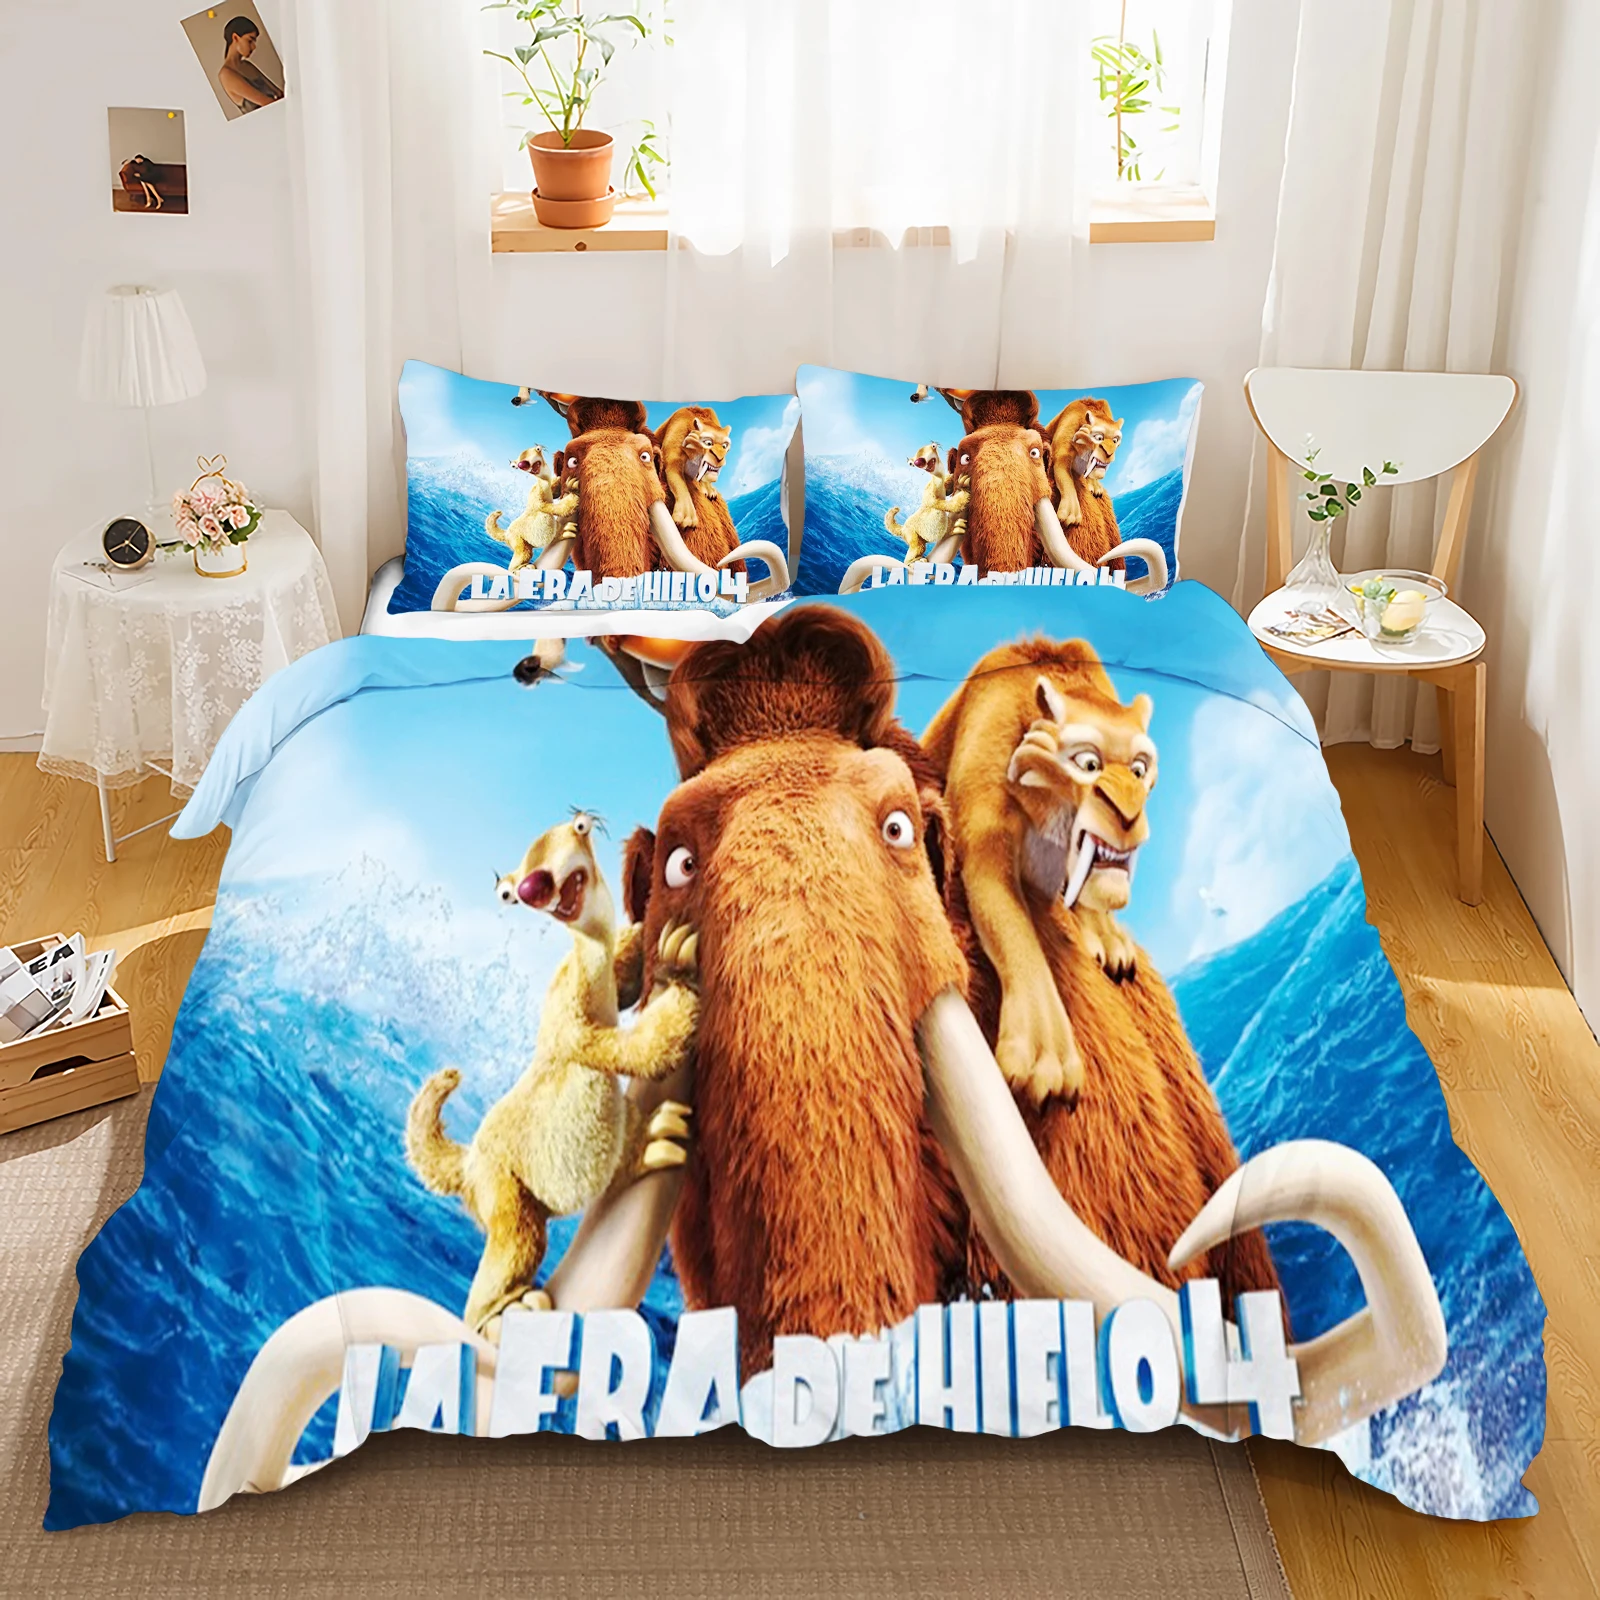 

Disney-Ice Age Quilt Cover for Bedroom Various Sizes Bedding Set 100% Polyester Decor Ultra Soft Comfortable New Designer